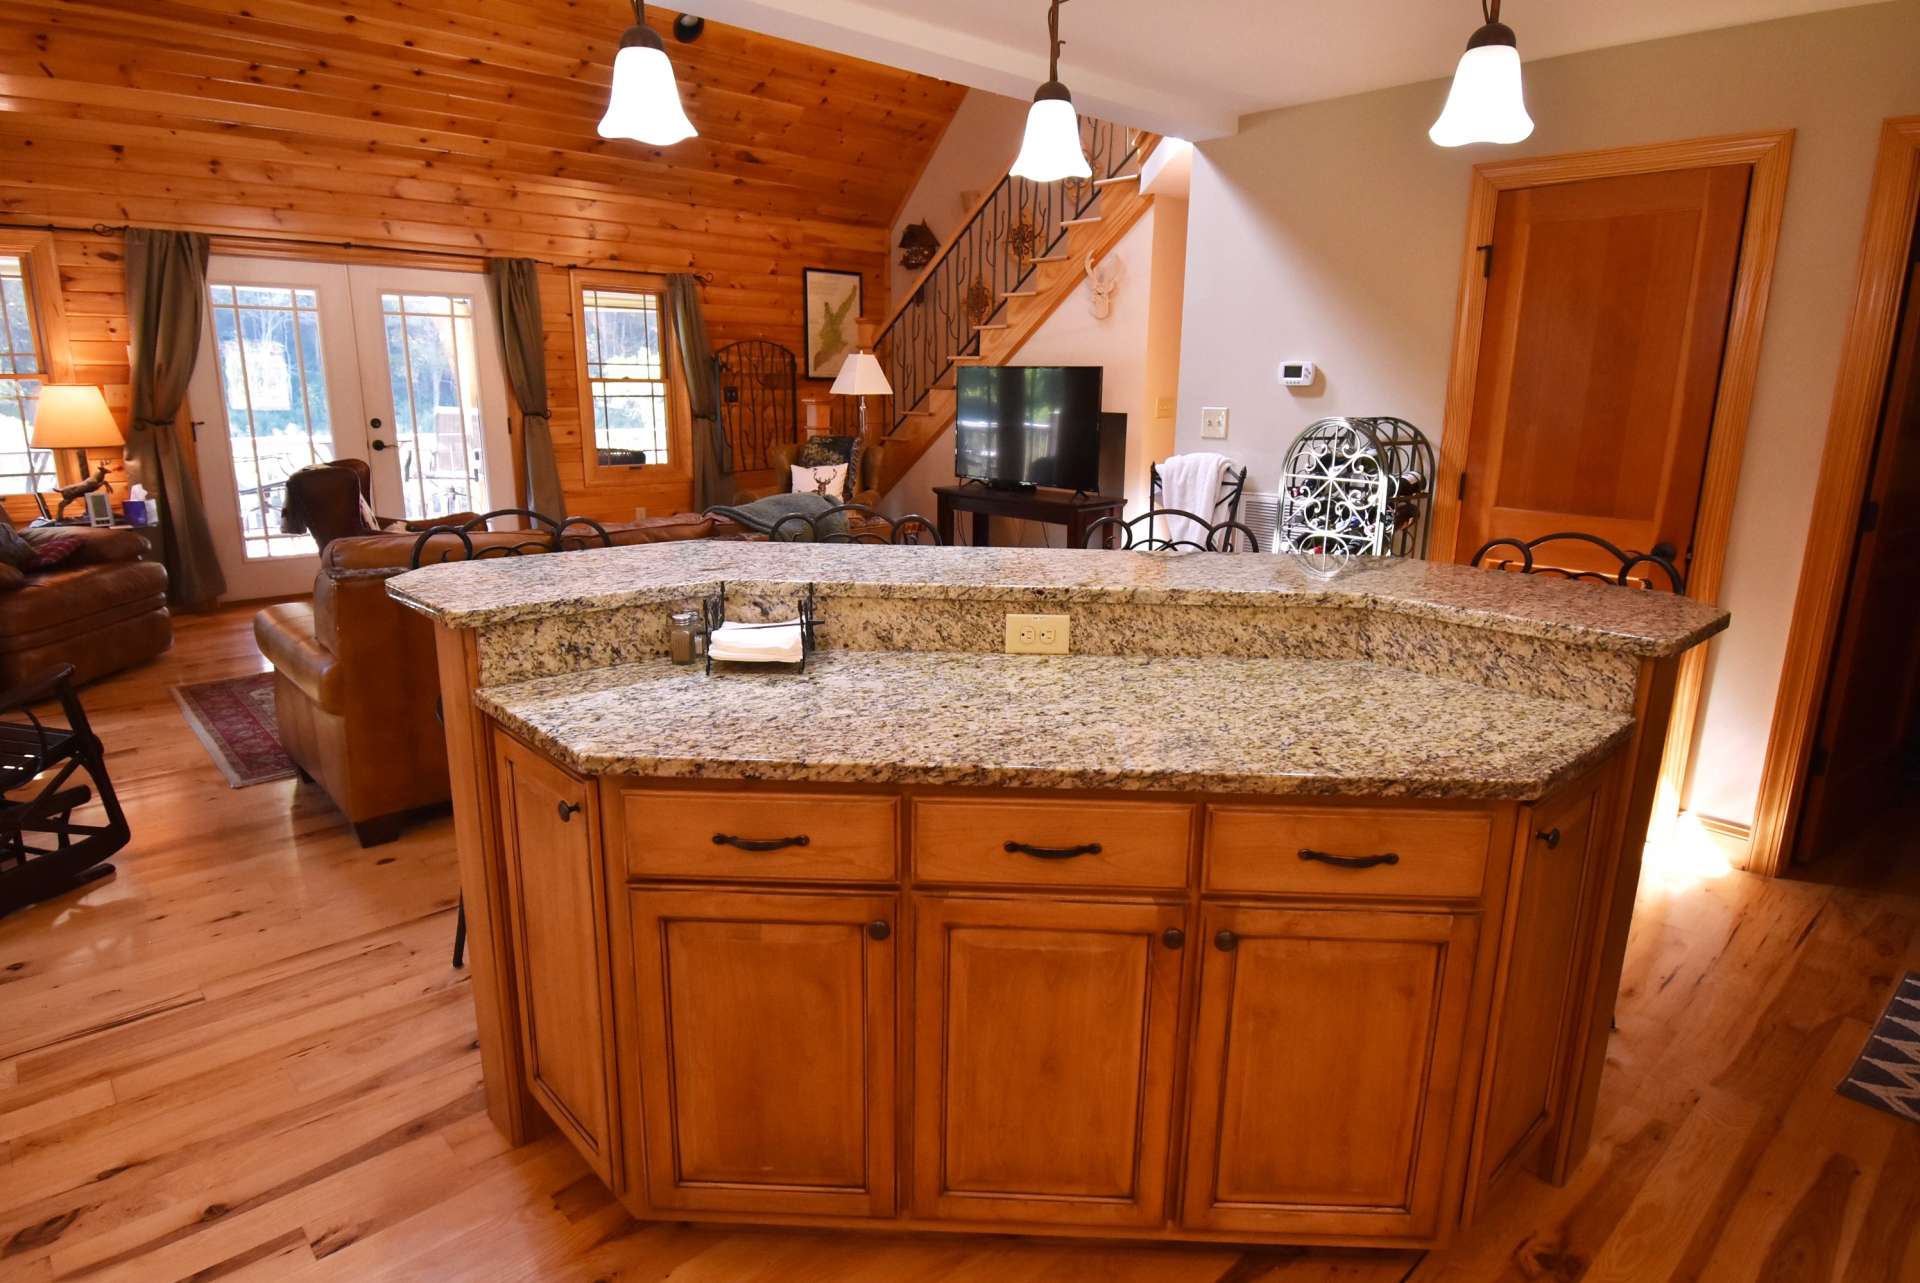 The island cabinets are stained, giving a two-tone kitchen. The back of the island is stone.